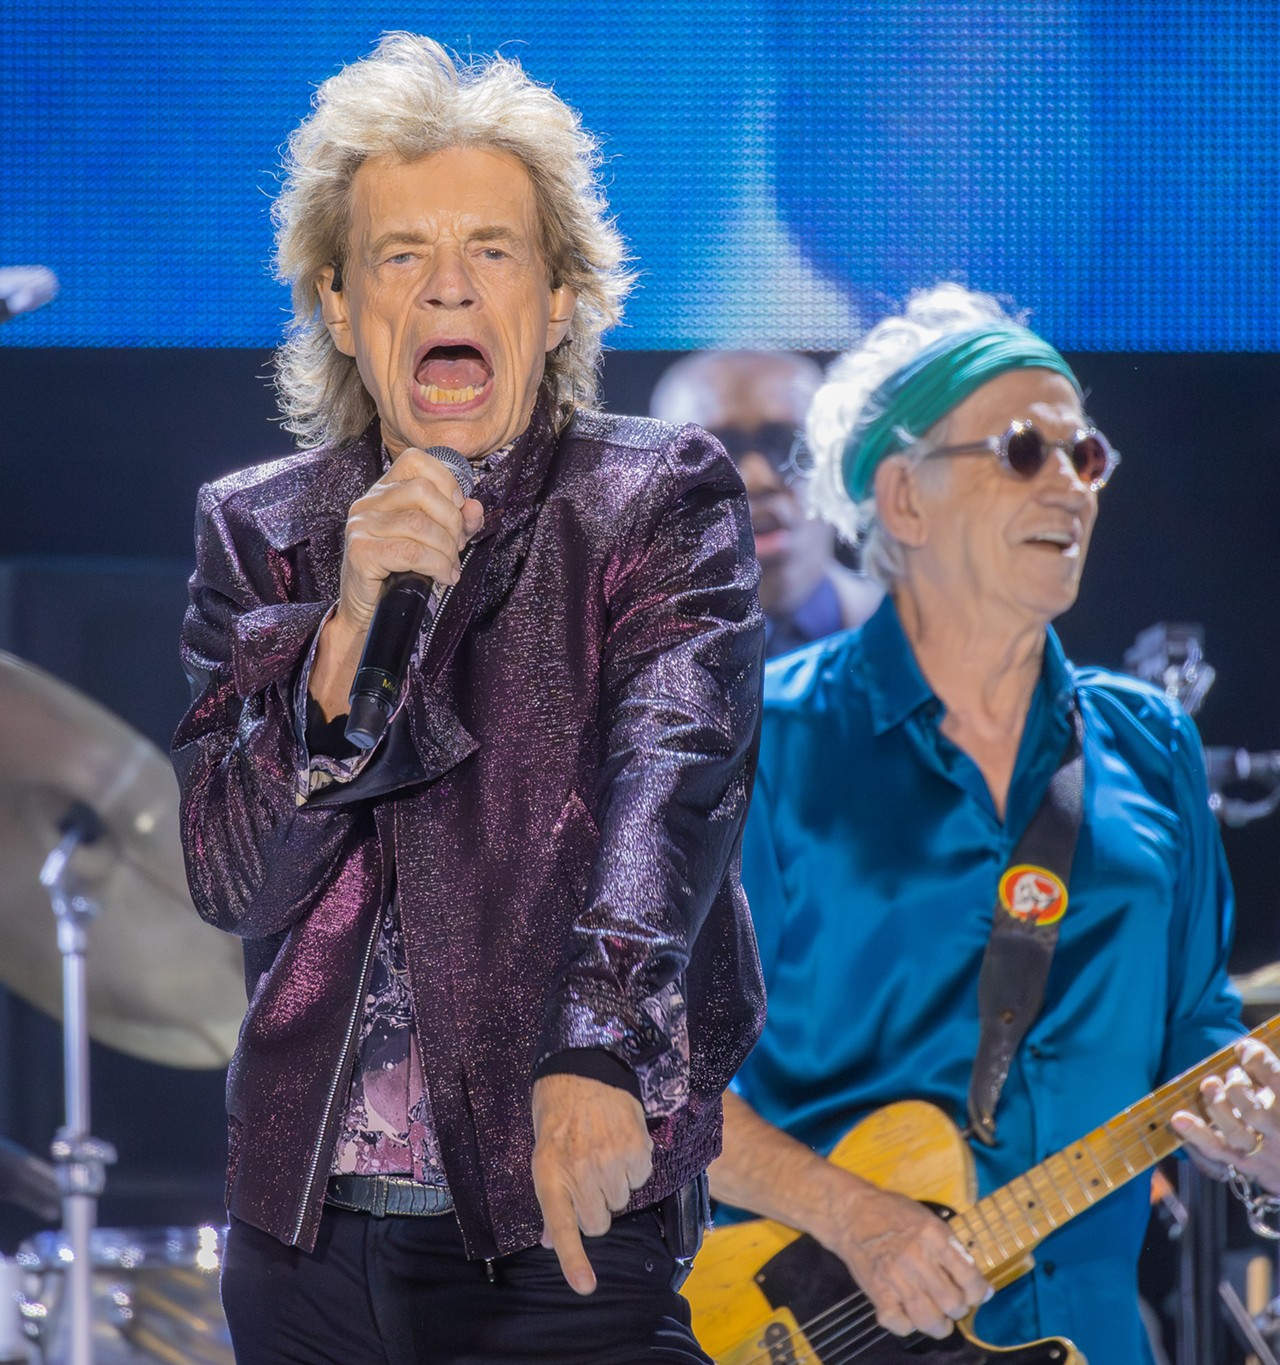 Review: The Rolling Stones bedazzle with new tracks and duets at historic Orlando concert [PHOTOS]